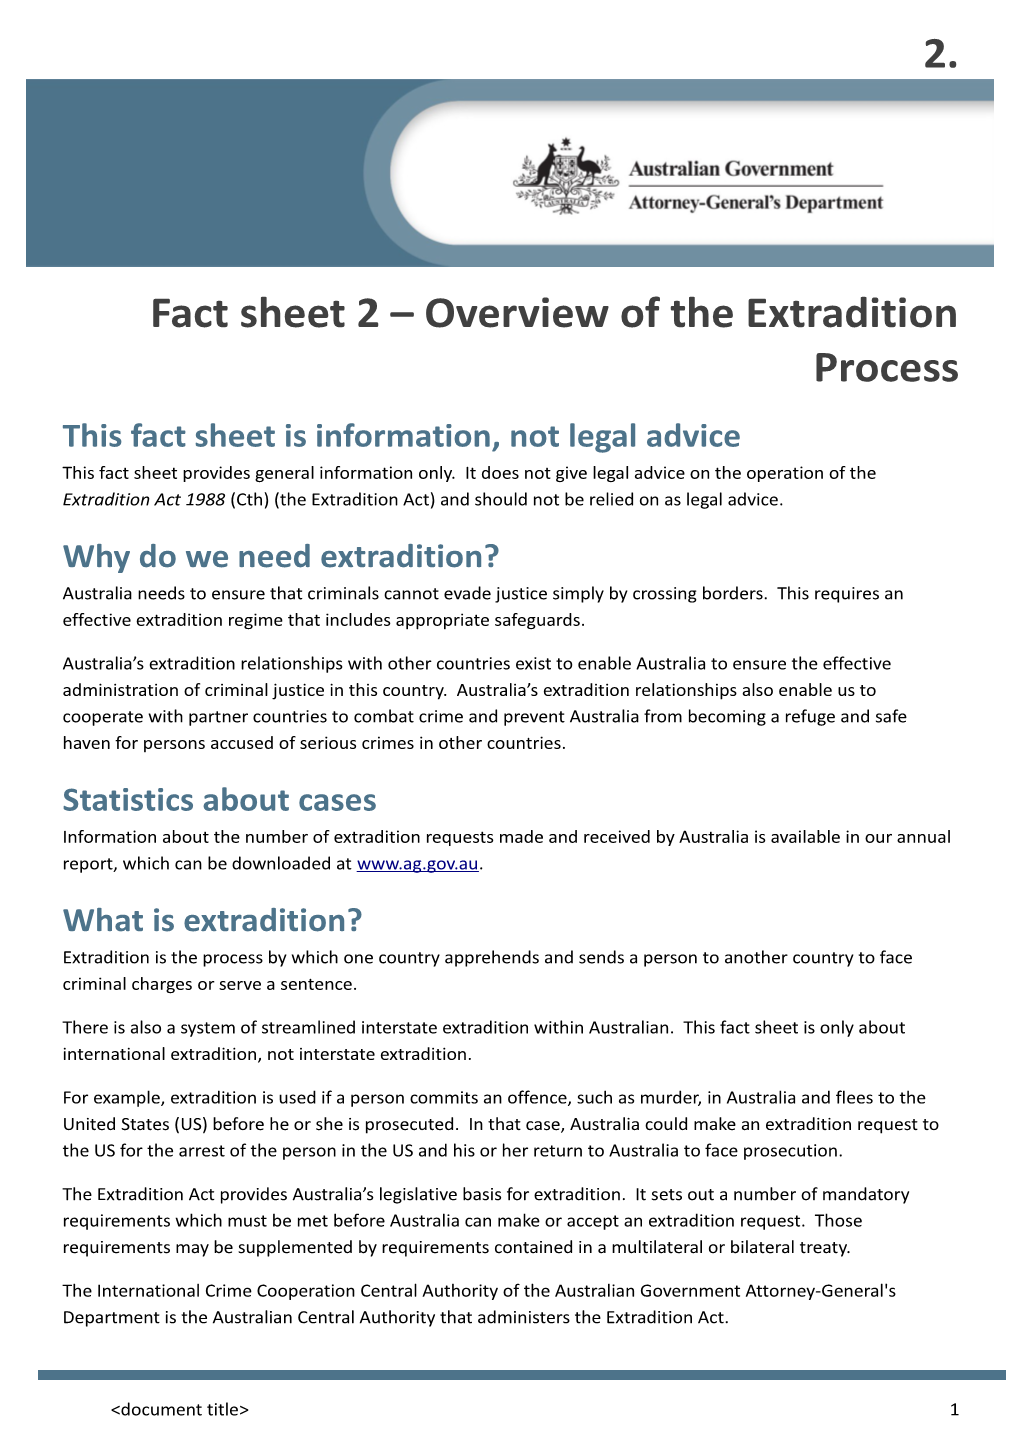 Factsheet Overview of the Extradition Process